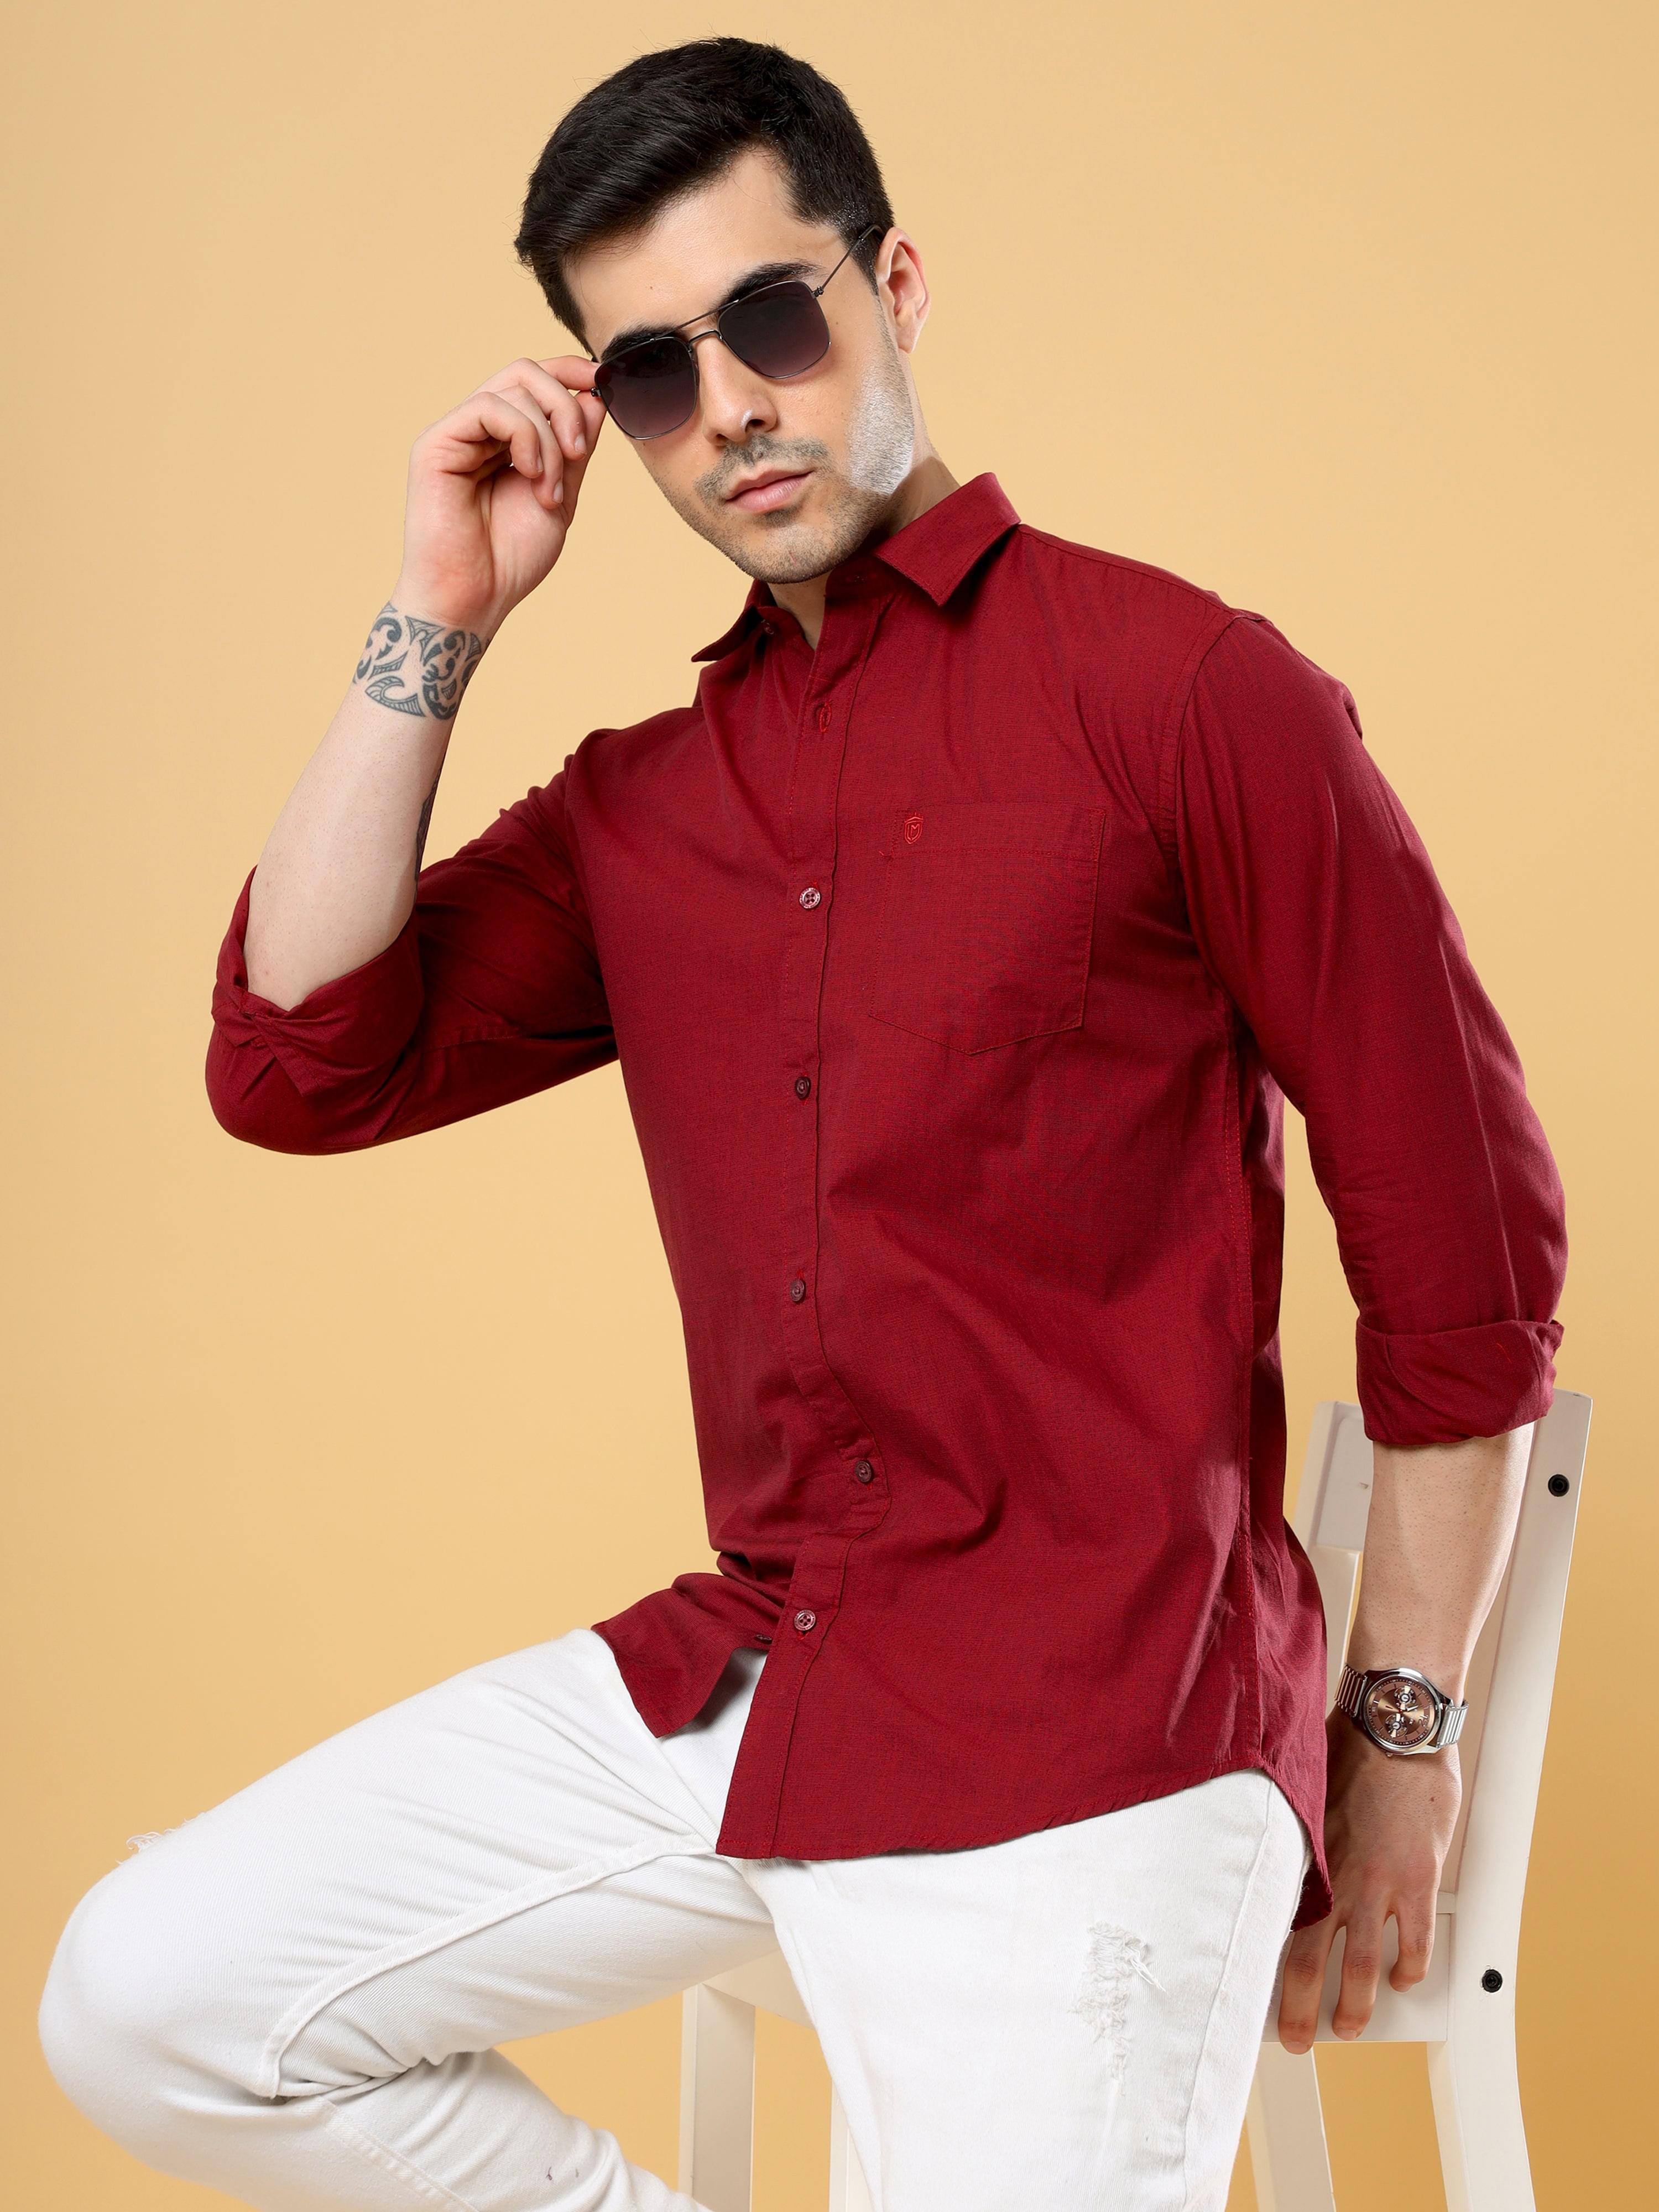 Shop Stylish Plain Maroon Shirt Online At Great PriceRs. 1039.00